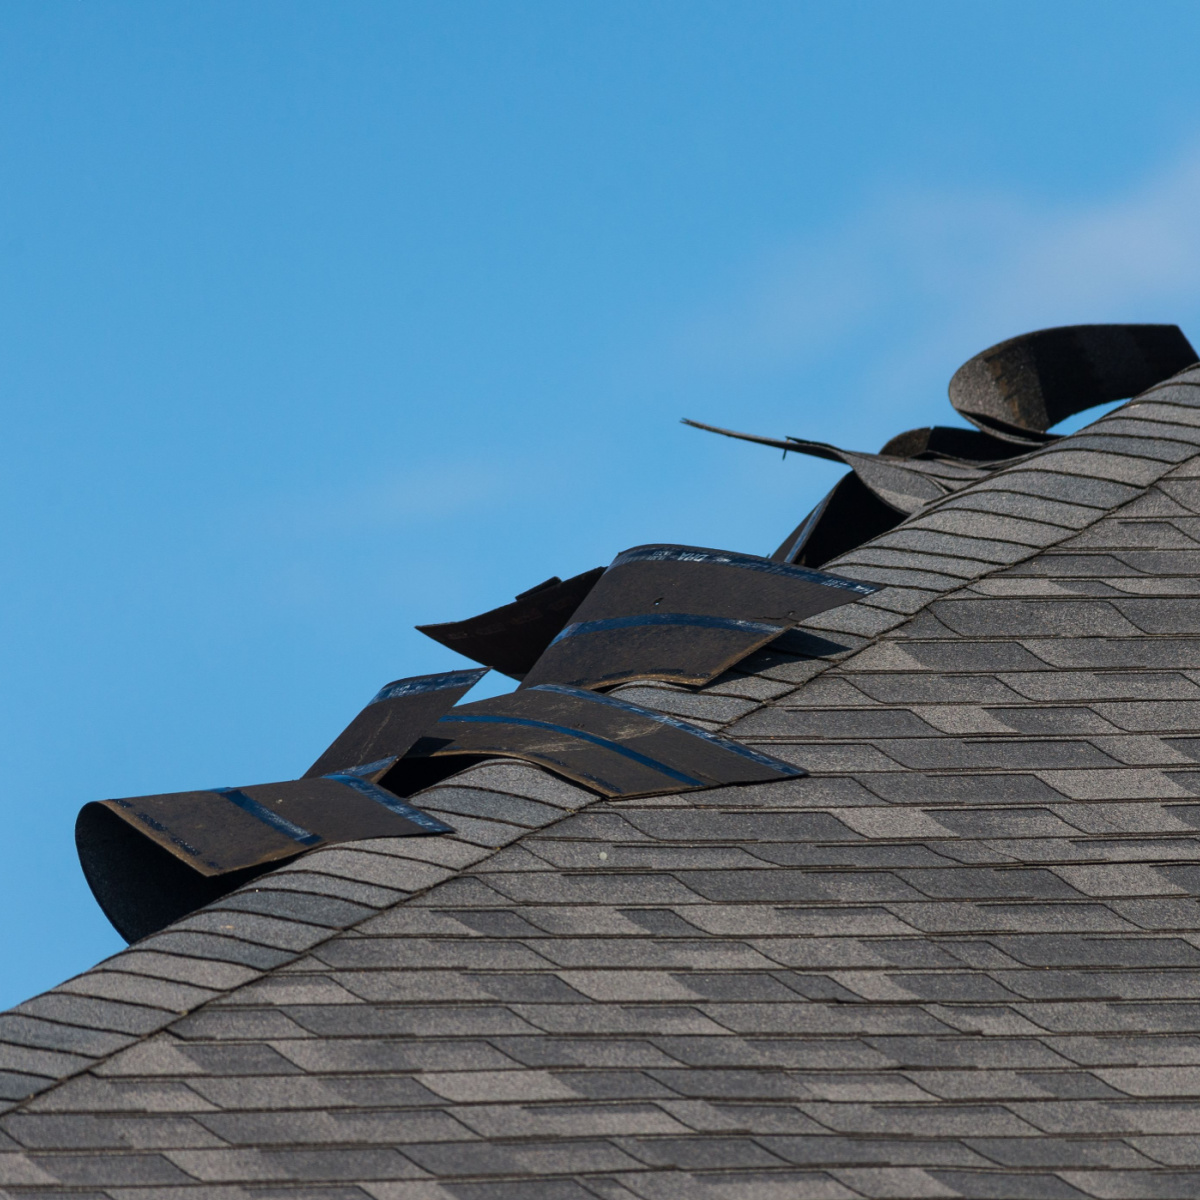 Shingles damaged from the wind